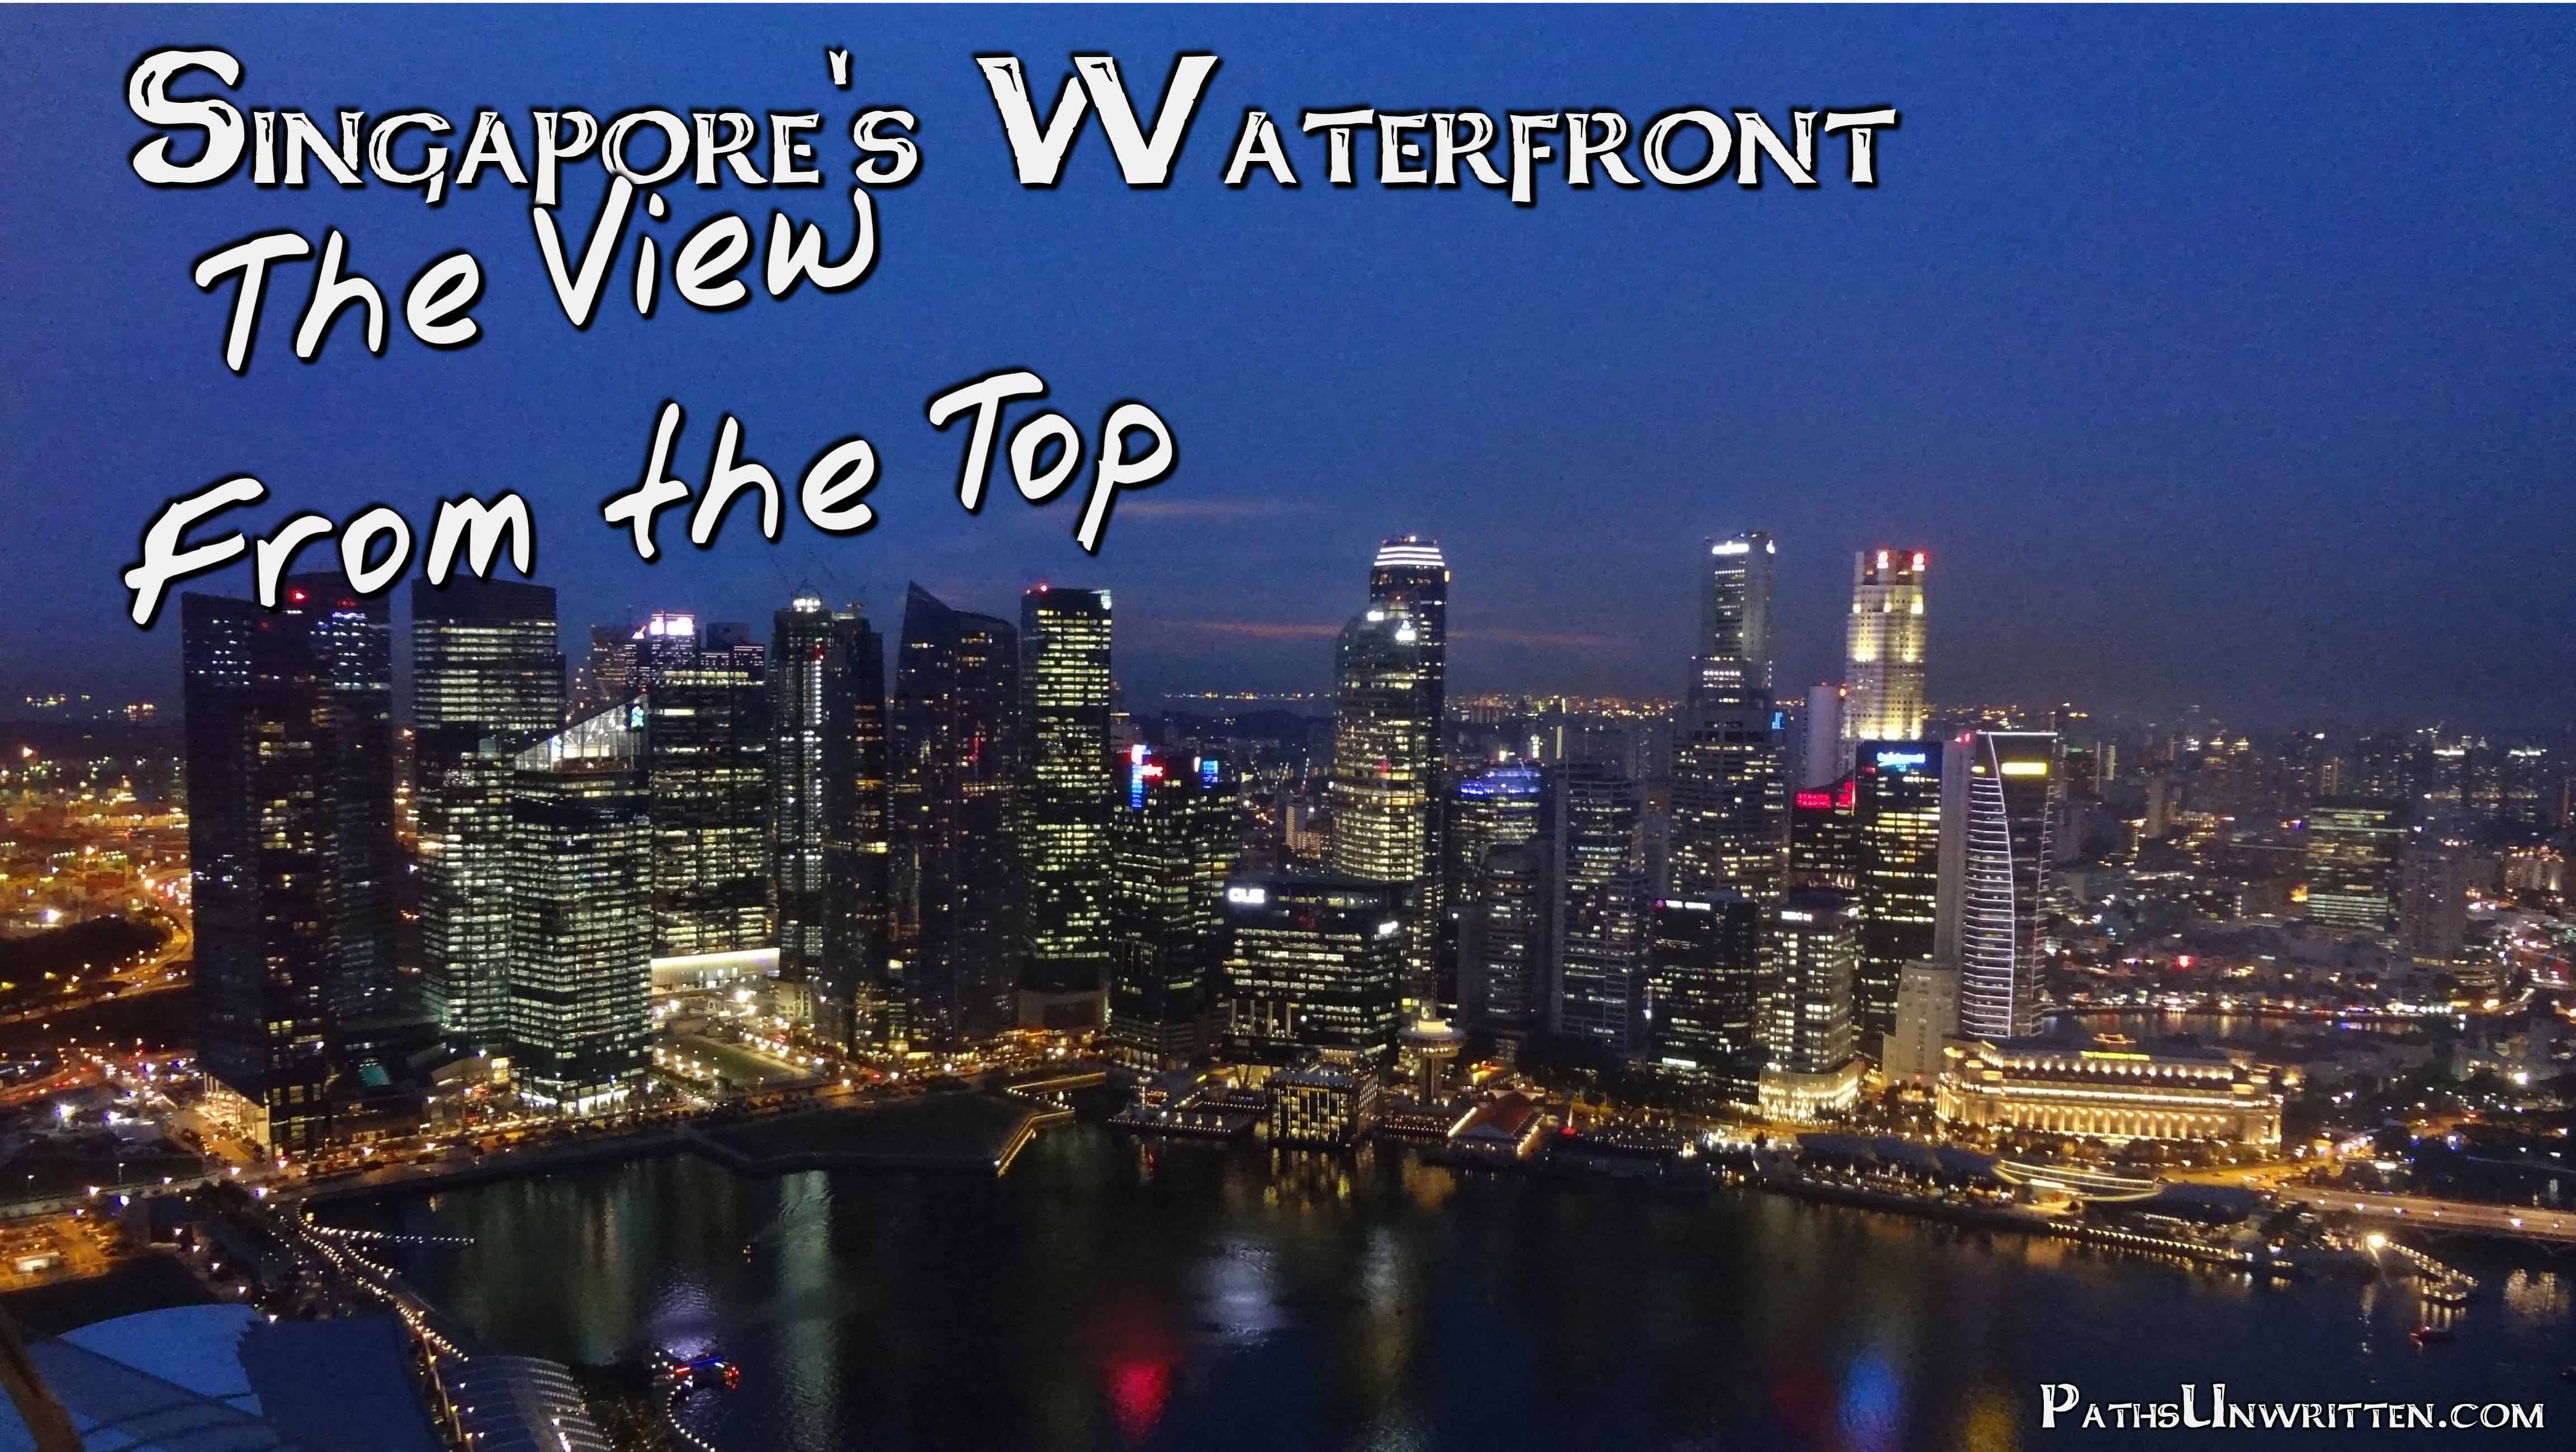 Singapore’s Waterfront: The View From the Top